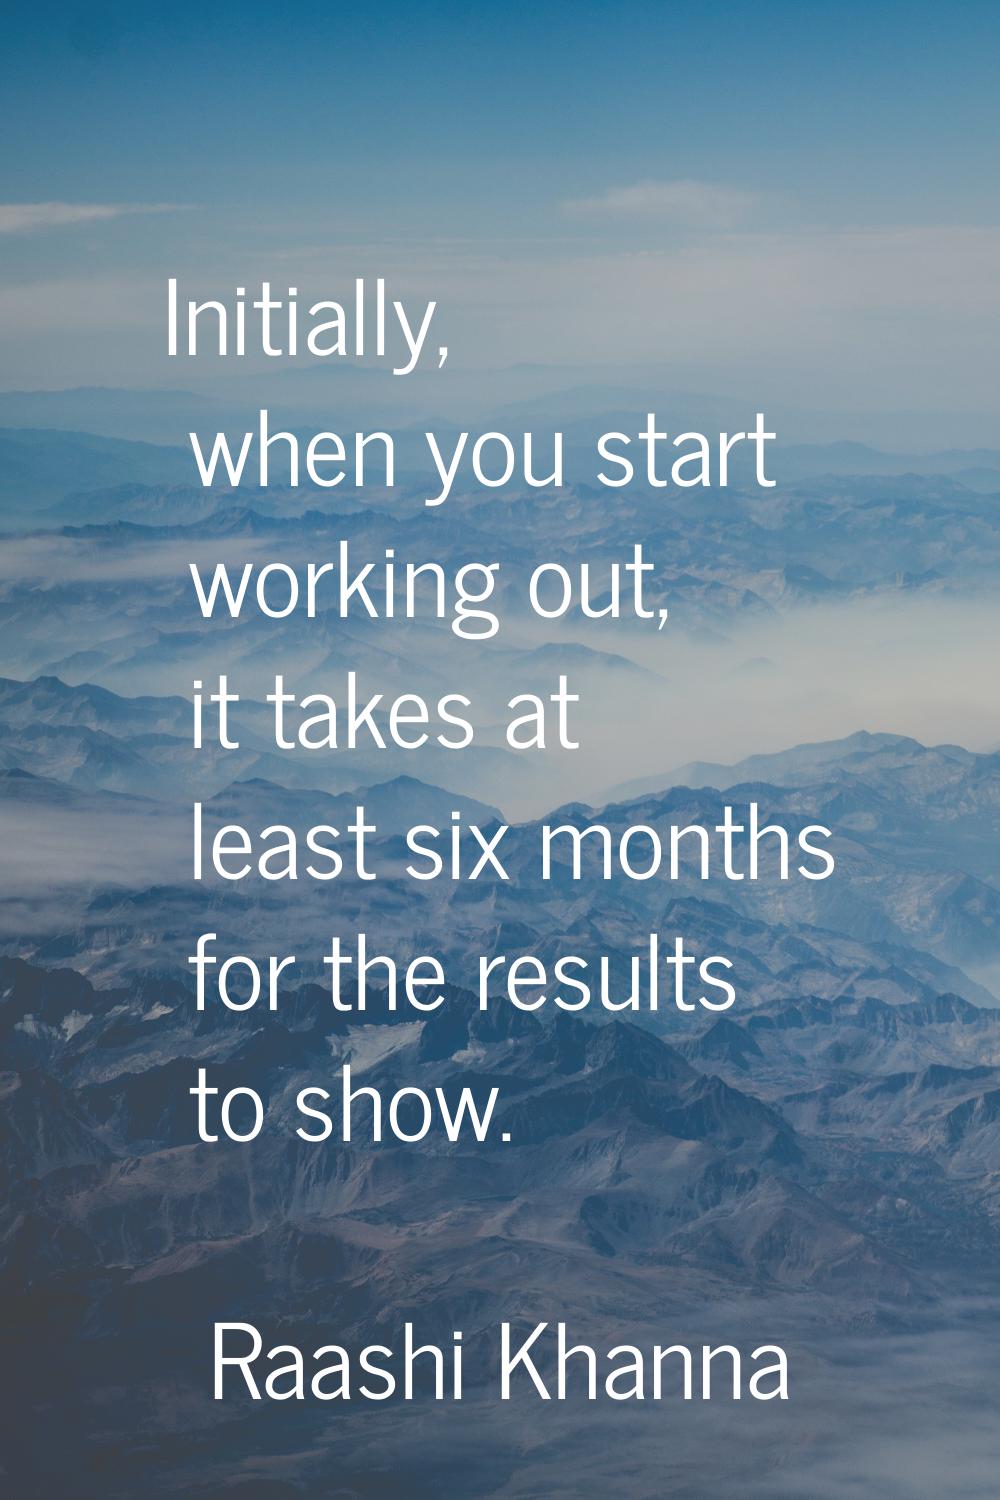 Initially, when you start working out, it takes at least six months for the results to show.